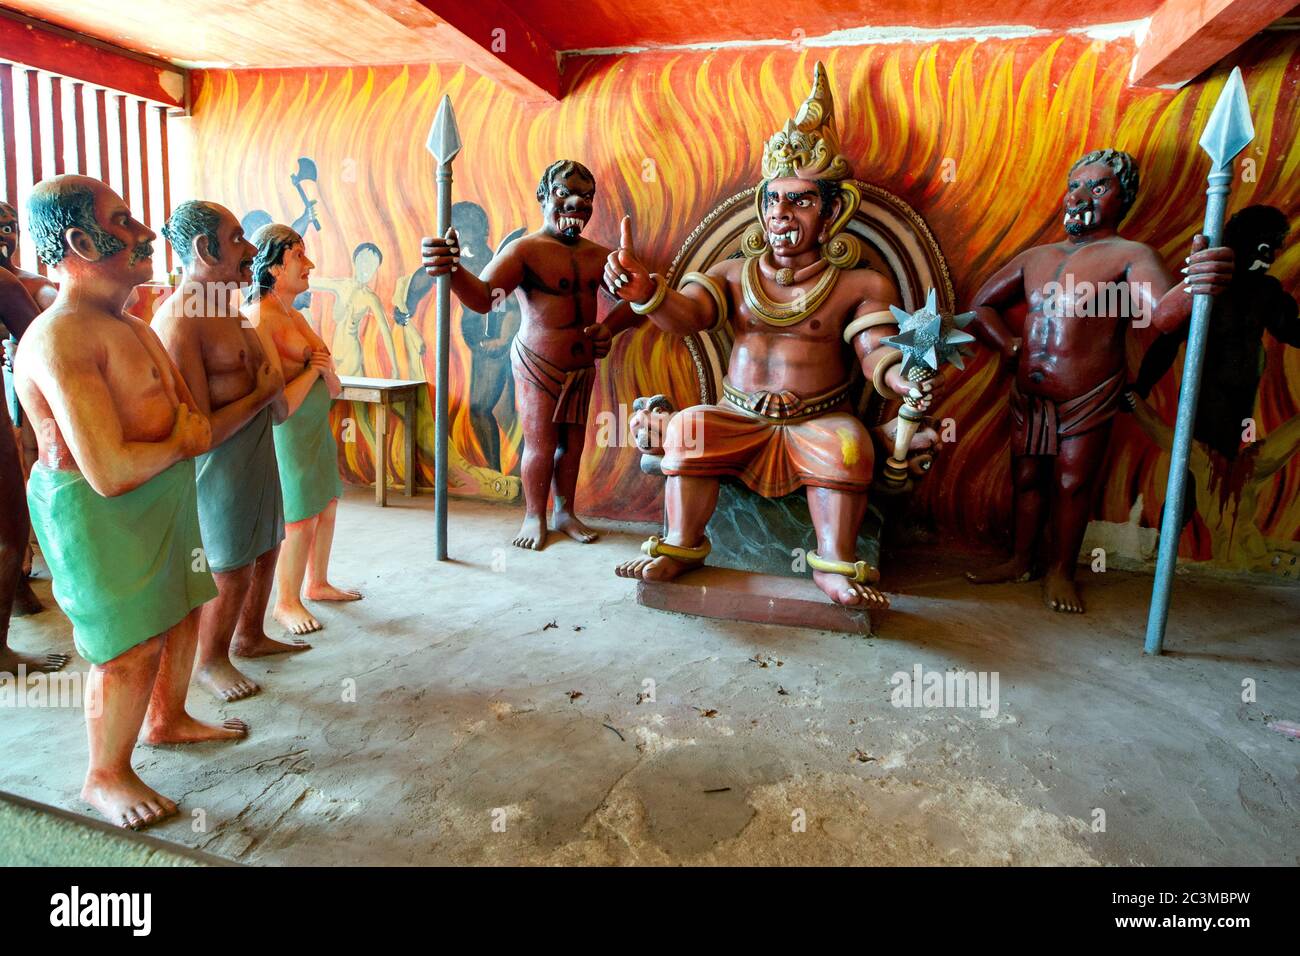 Sinners prepare to face their punishment in a scene displayed in the Chamber of Horrors at Wewurukannala Vihara at Dickwella in southernSri Lanka. Stock Photo